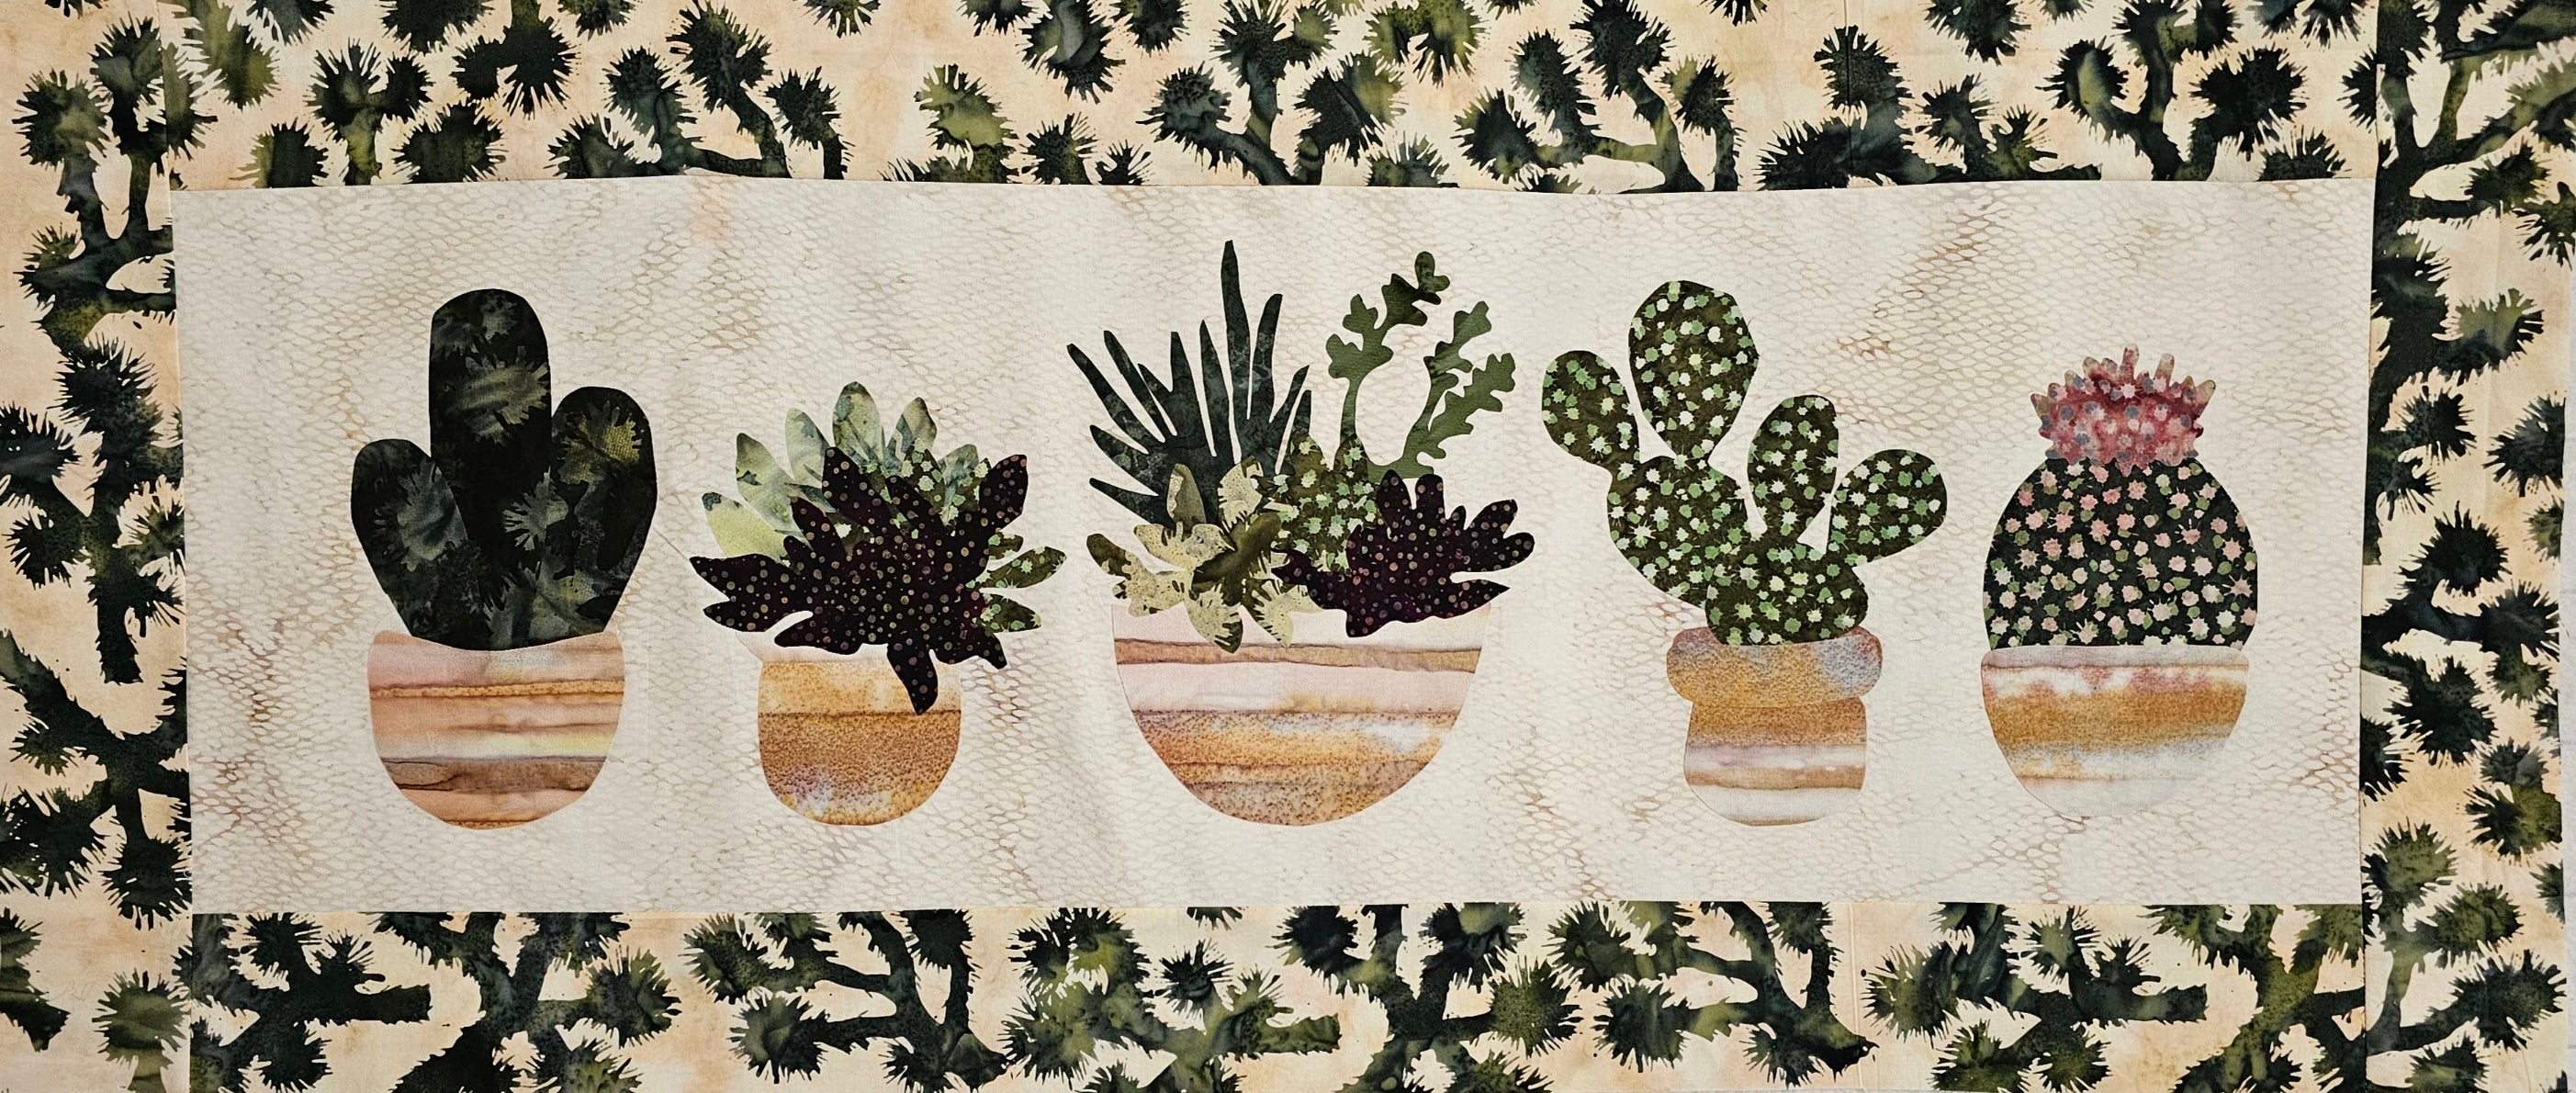 Pine Needles Prickly Pots Traditional Applique Quilt Kit PP01